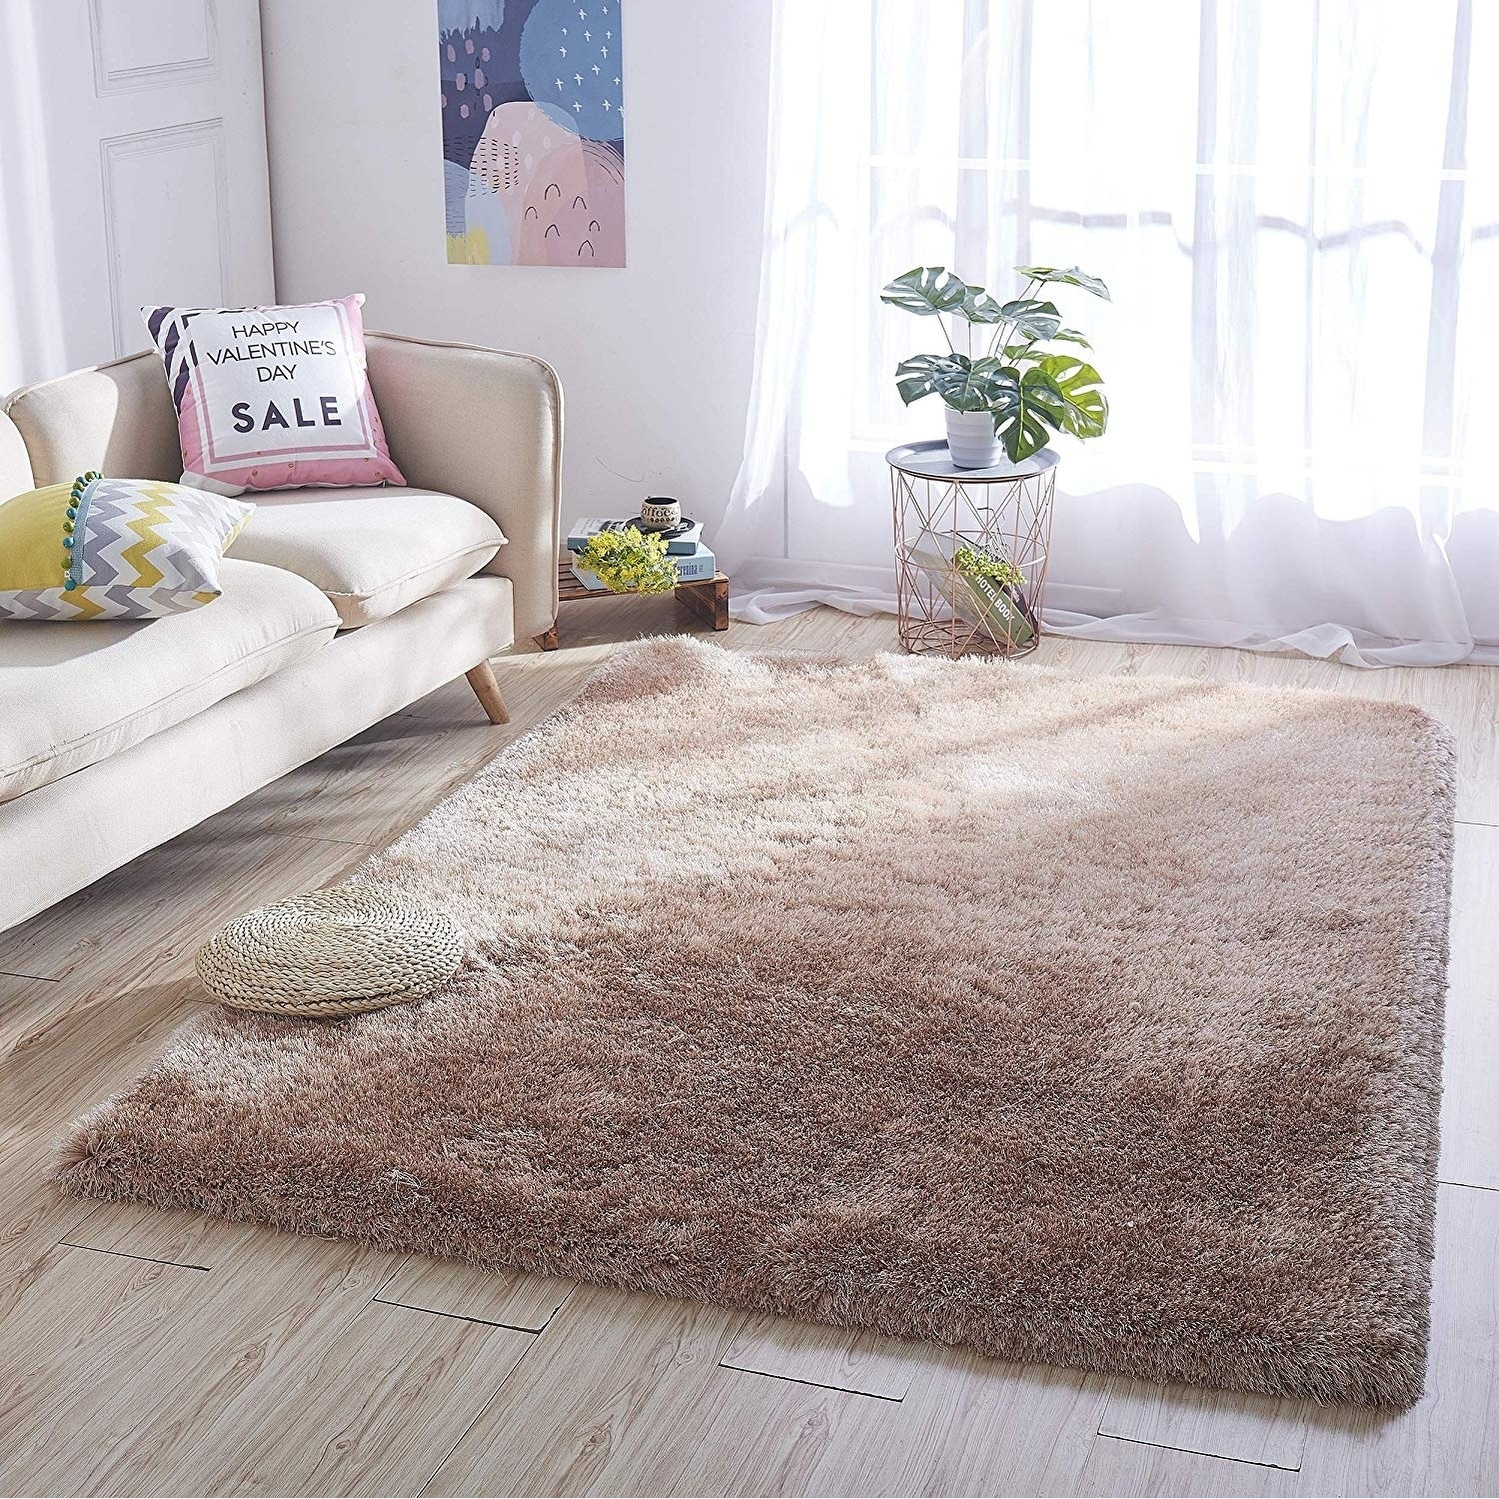 Small Large Non Shed Shaggy Rug Living Room Soft Dense Pile Modern Design New 